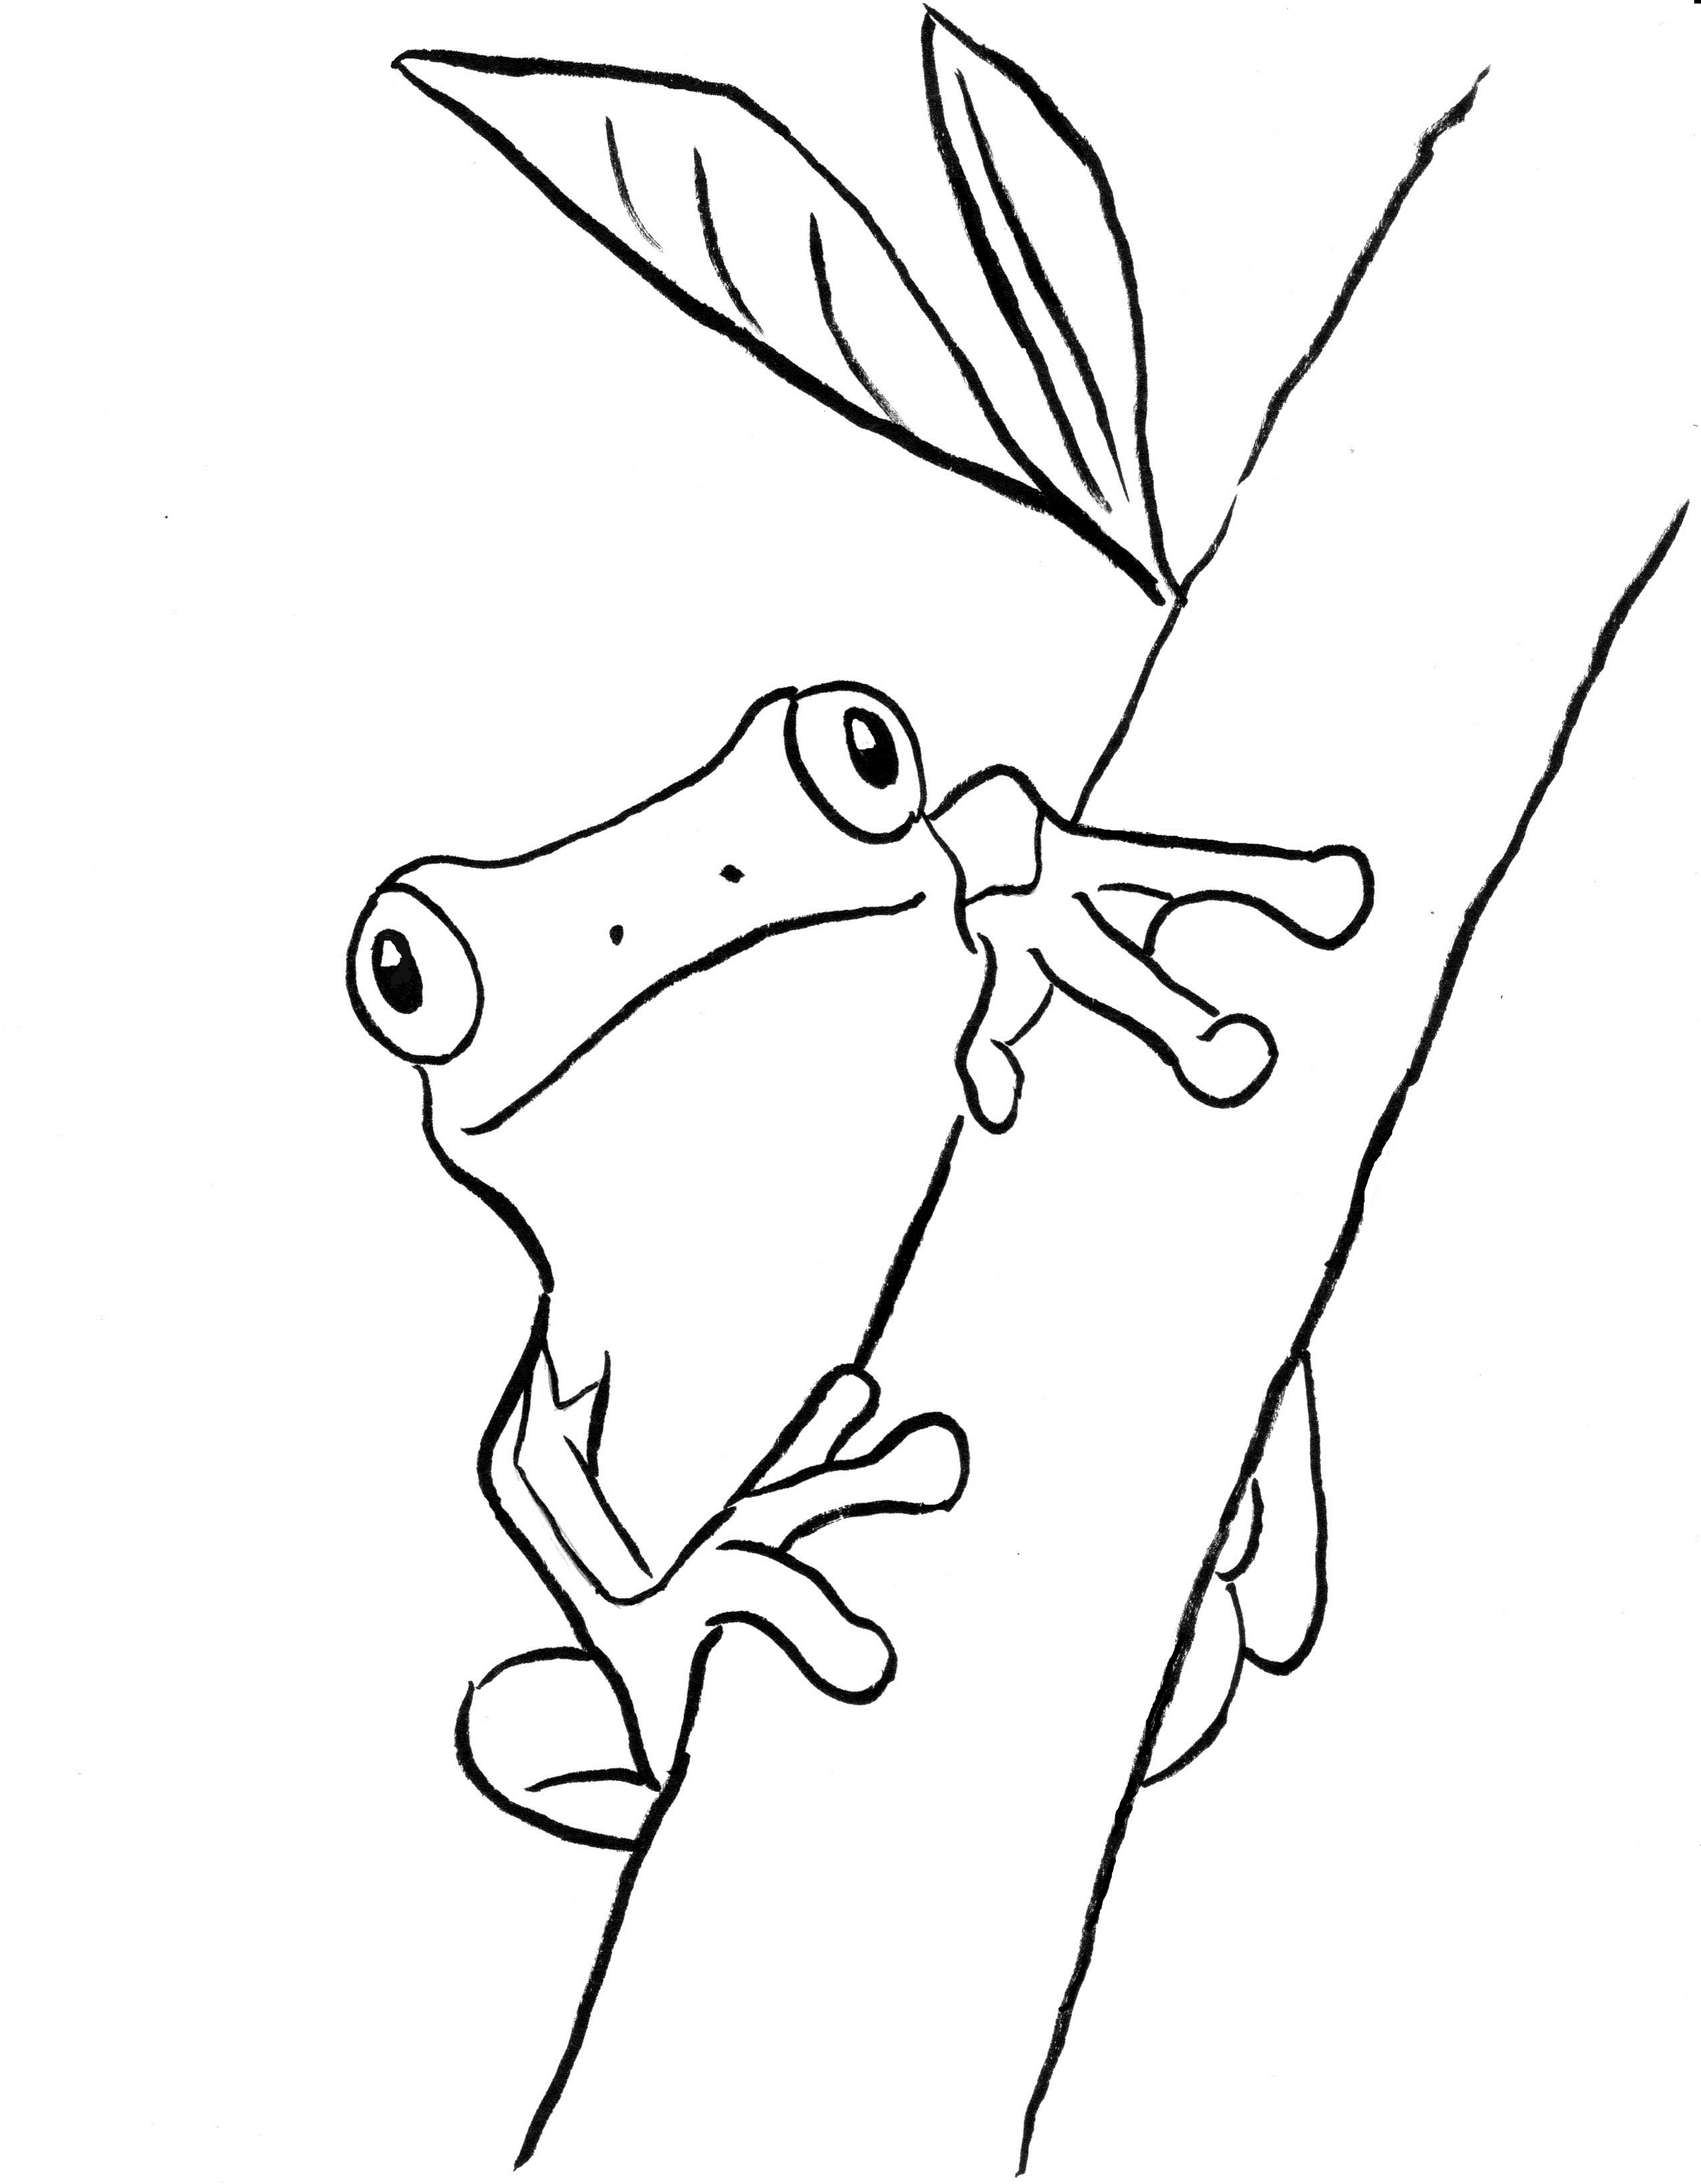 Tree Frog Coloring Page - Art Starts